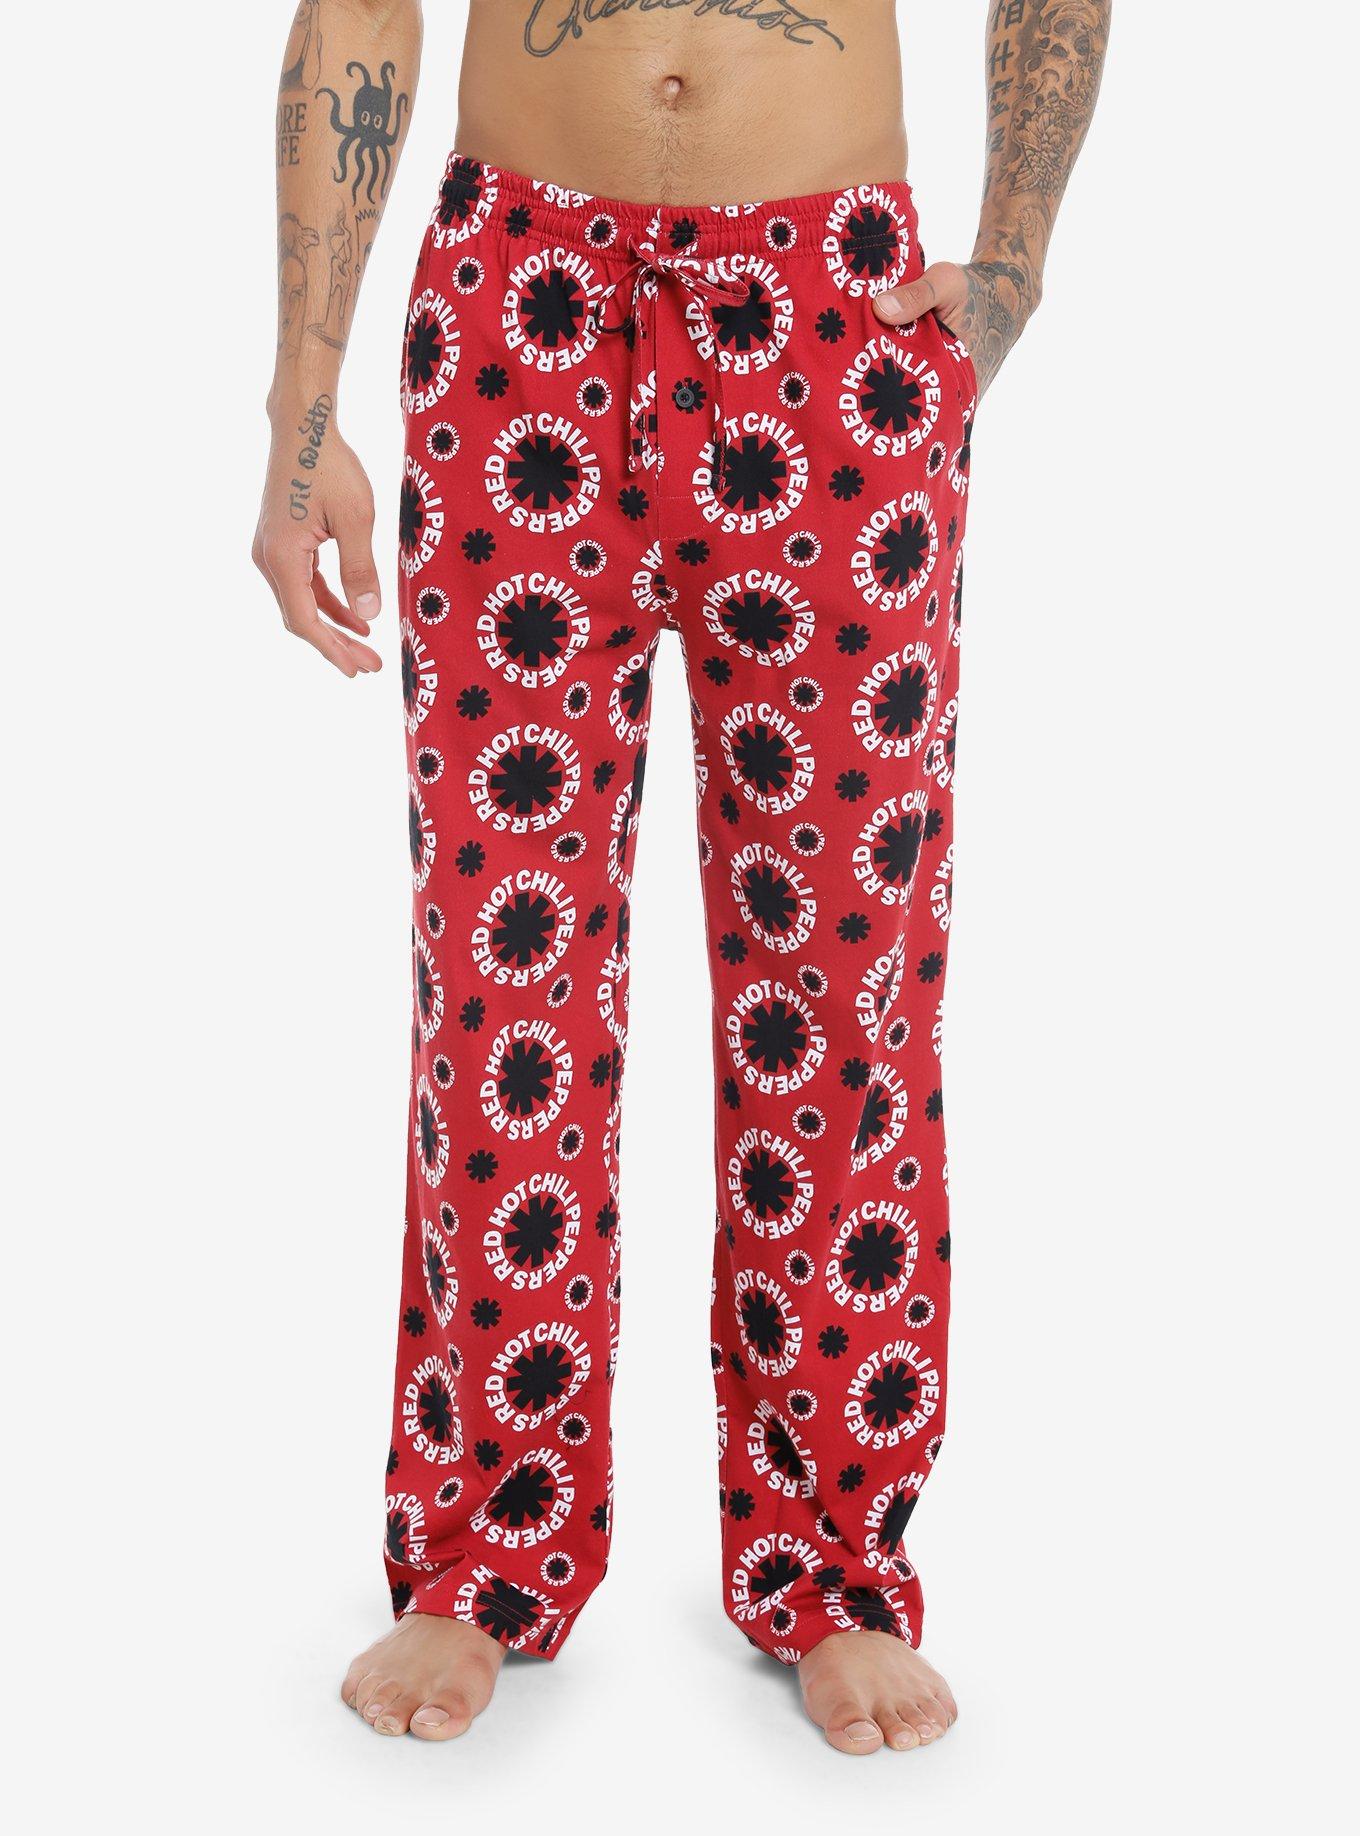 Red Hot Chili Peppers Logo Pajama Pants | Hot Topic